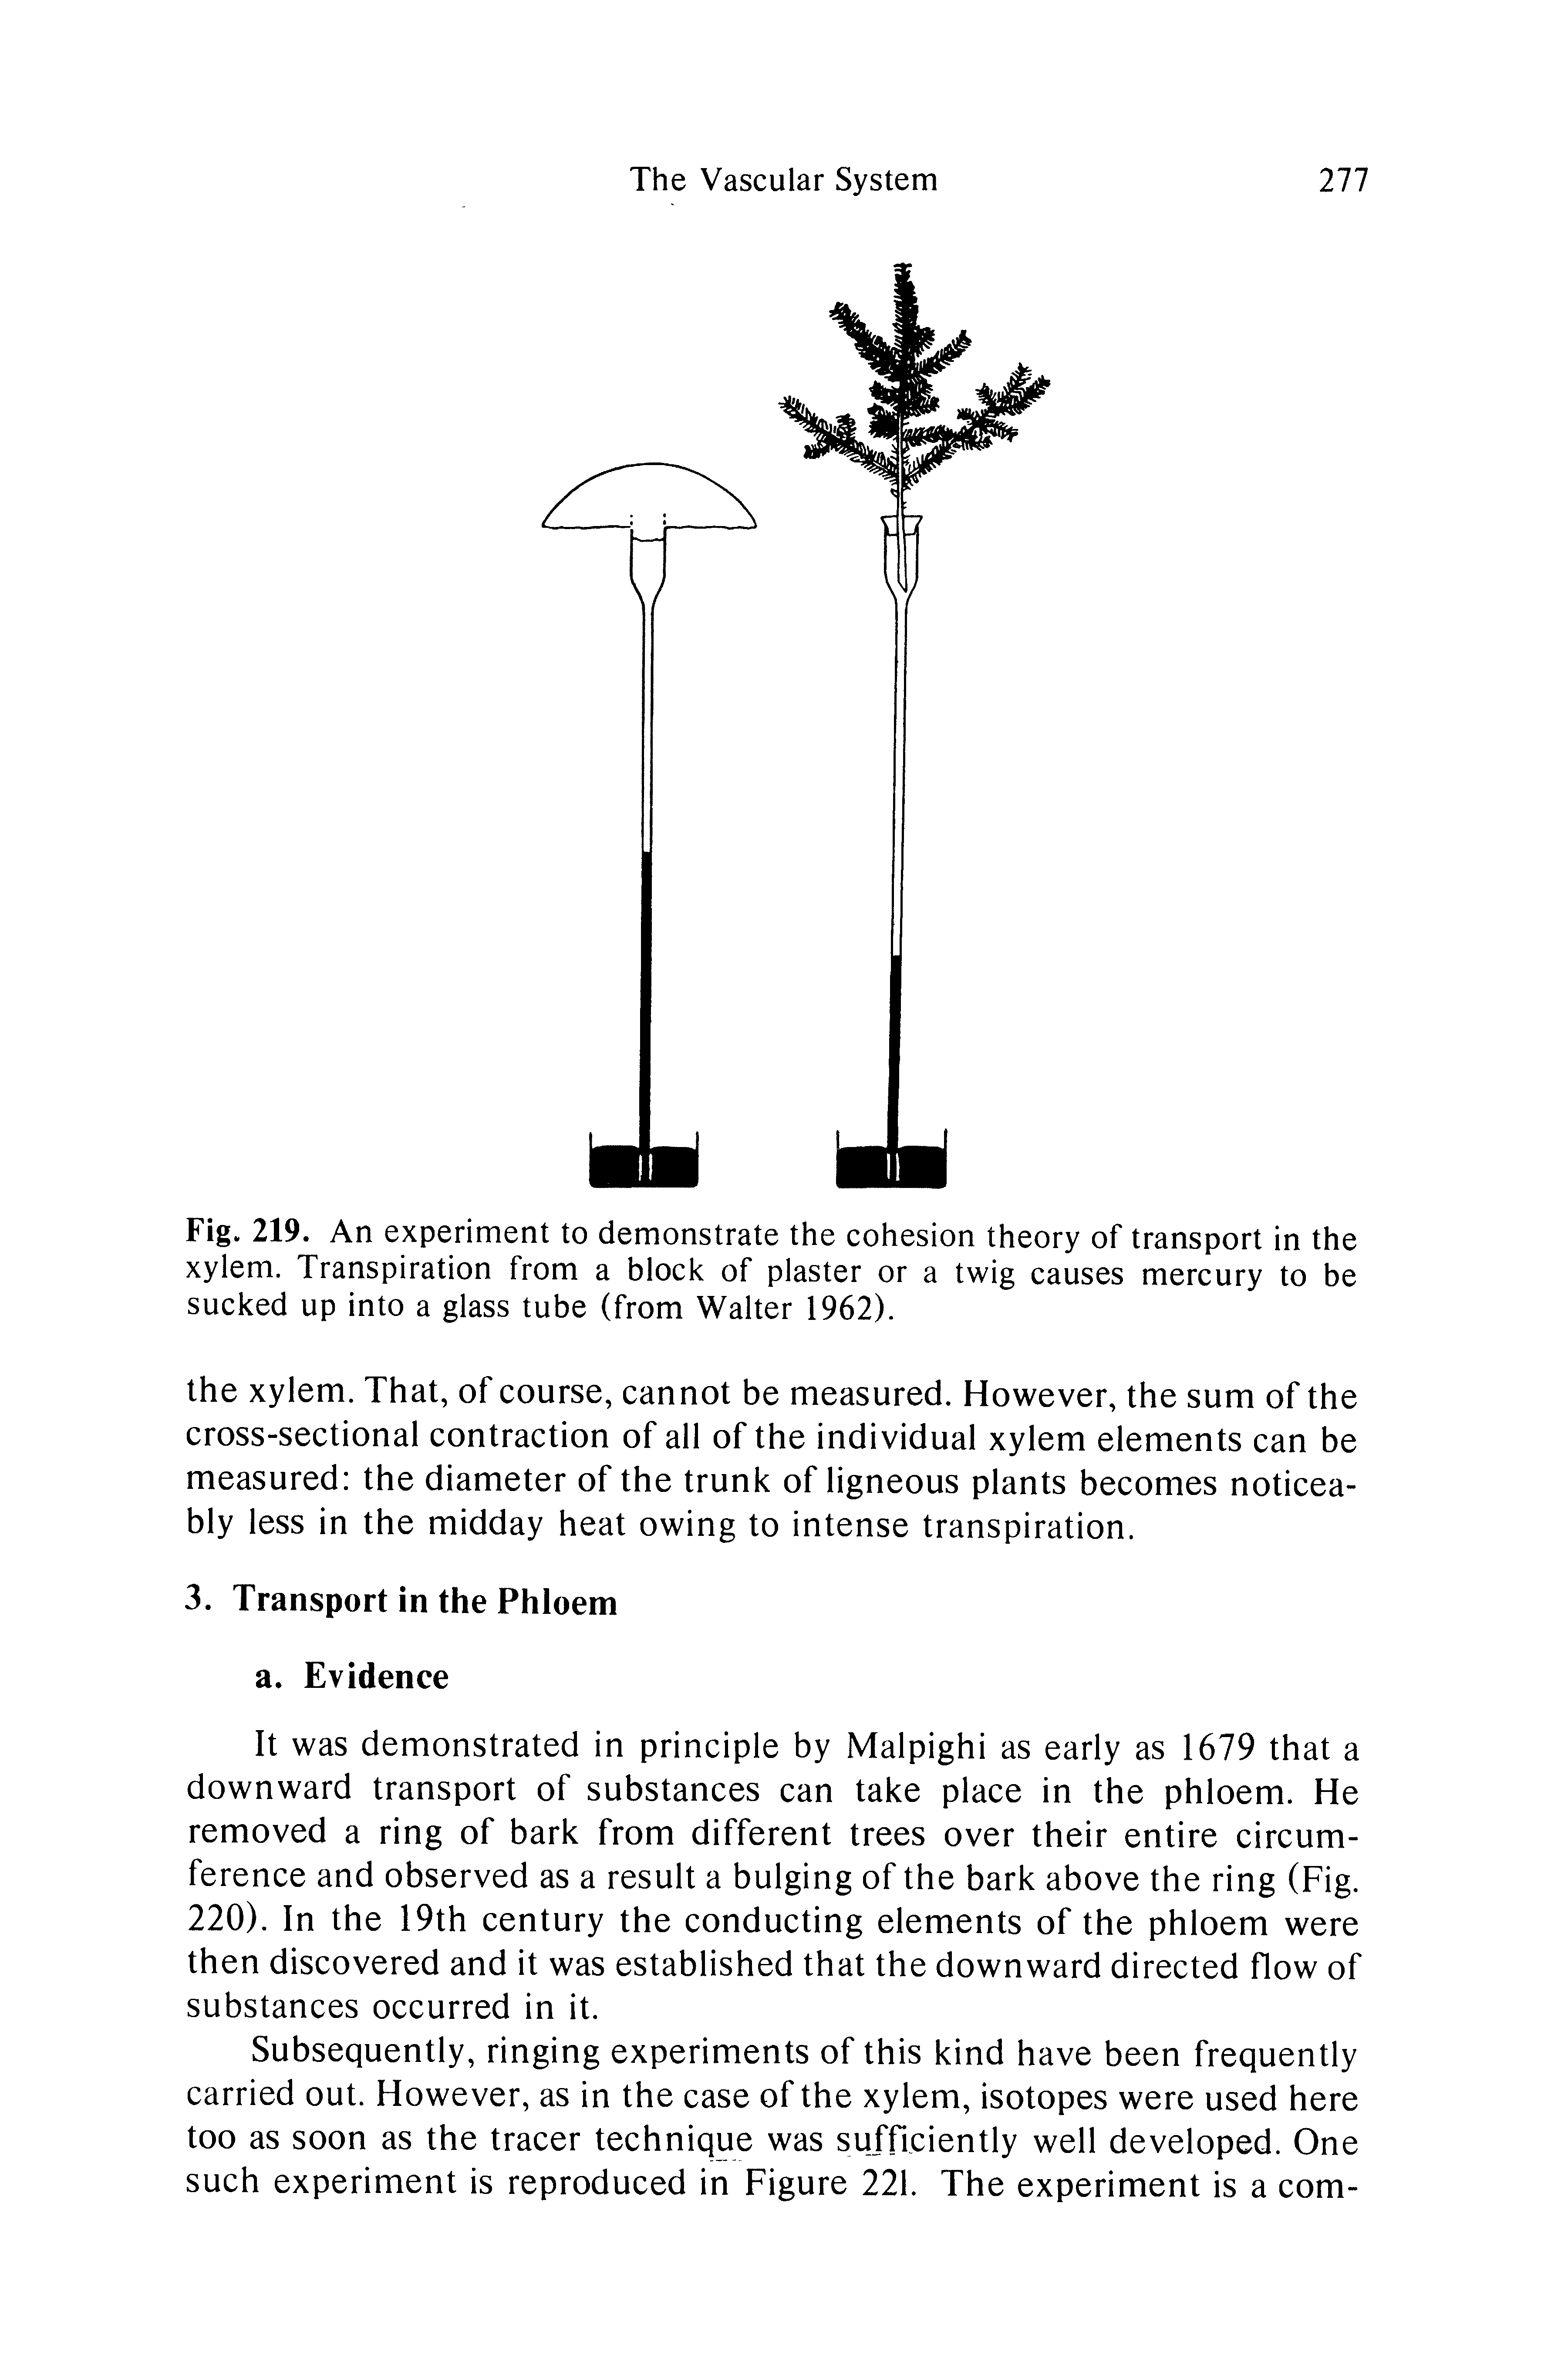 Fig. 219. An experiment to demonstrate the cohesion theory of transport in the xylem. Transpiration from a block of plaster or a twig causes mercury to be sucked up into a glass tube (from Walter 1962).